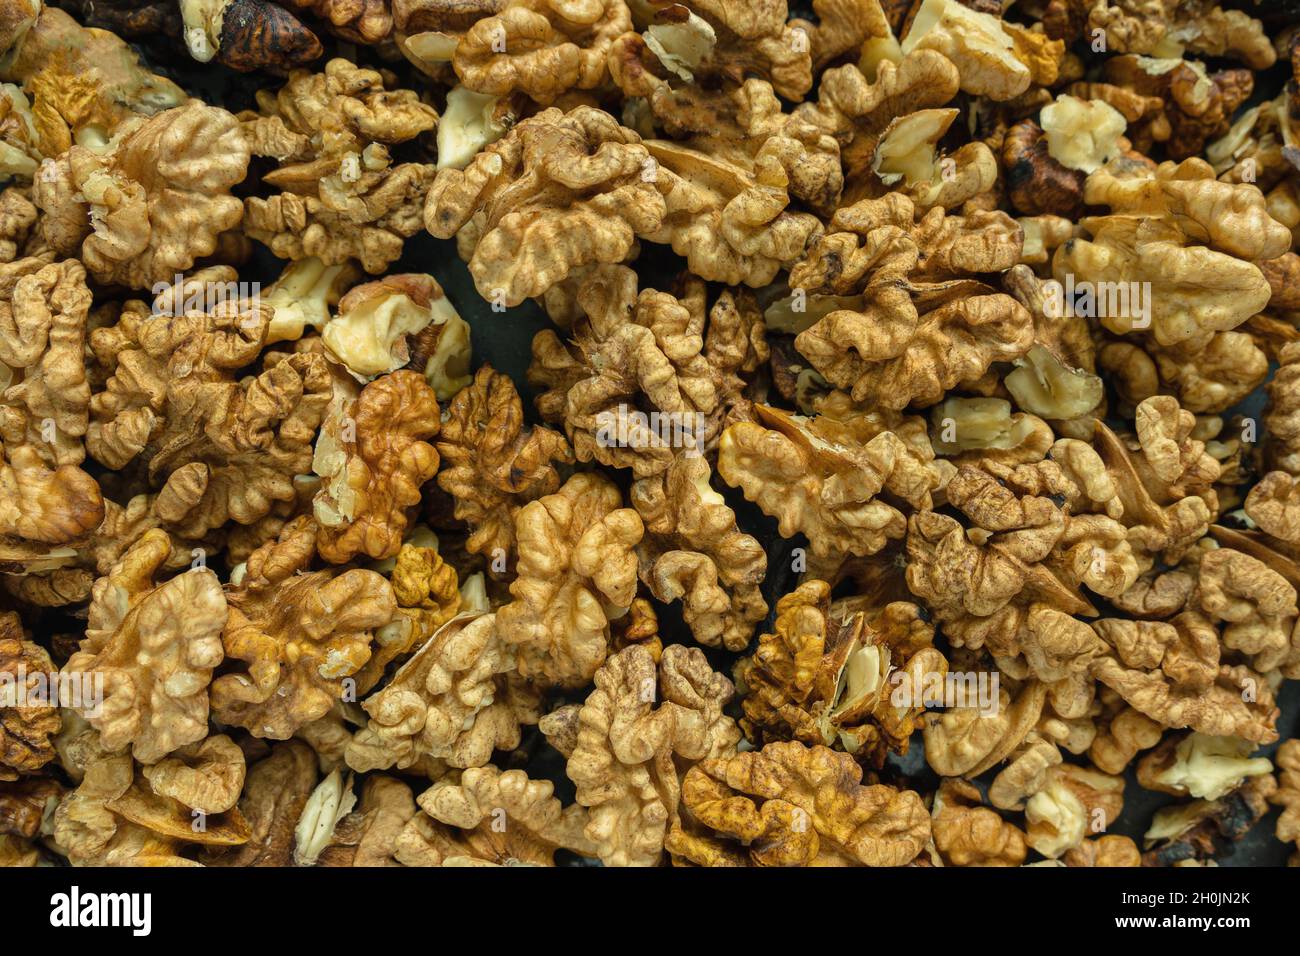 Background from a pile of peeled walnut halves. Top view. Close-up Stock Photo